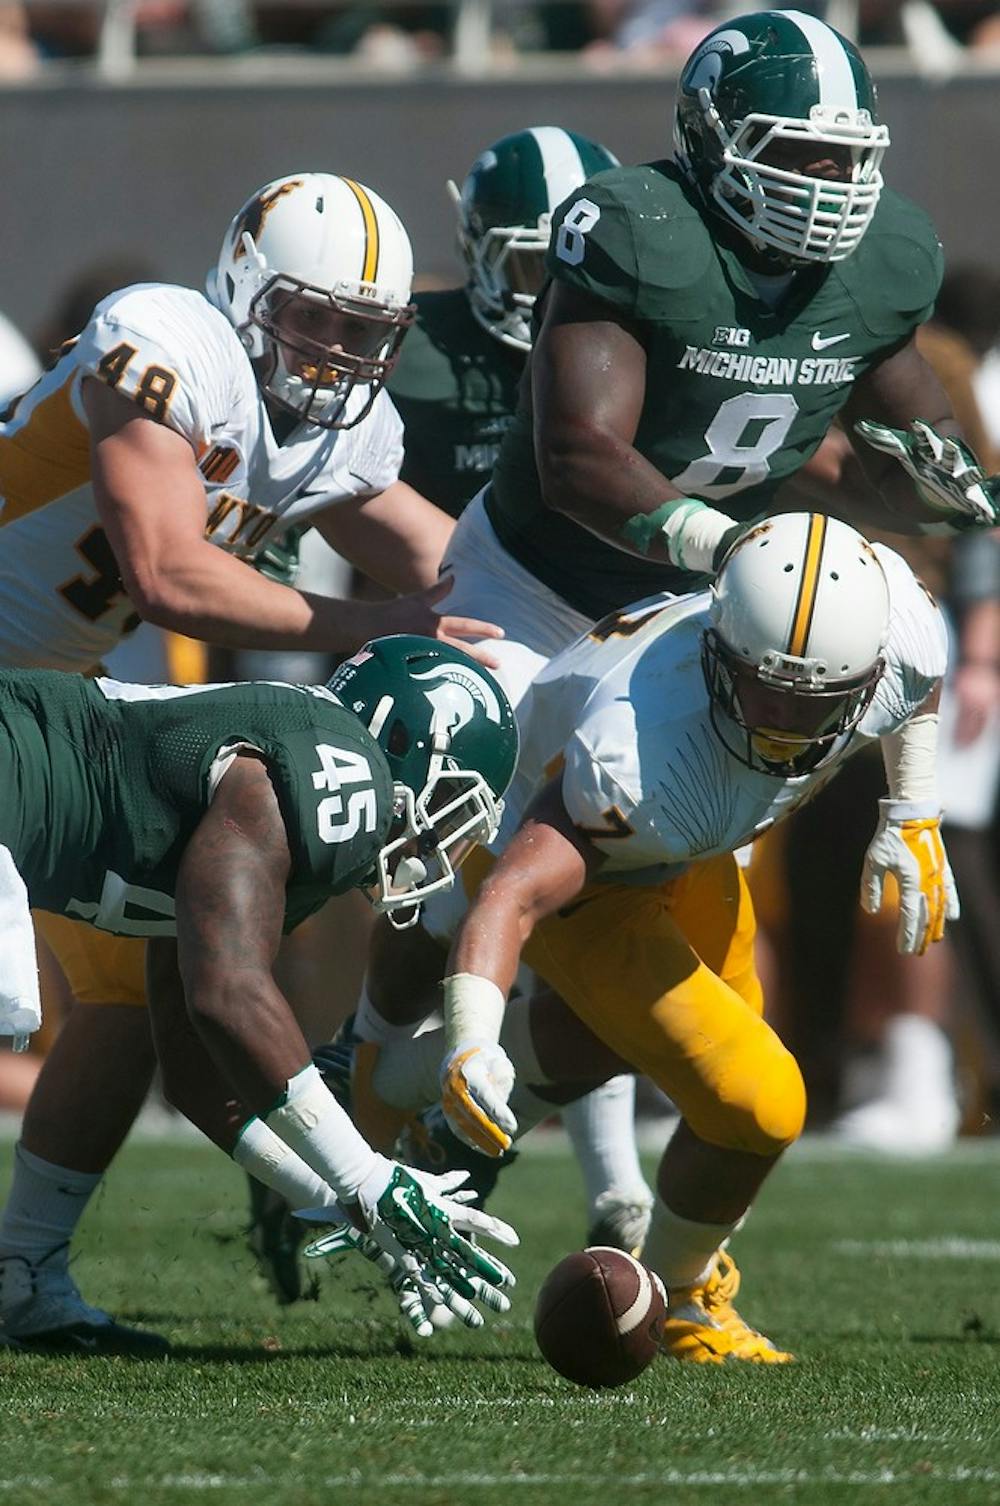 <p>Junior linebacker Darien Harris and Wyoming running back D.J. May dive to recover a Wyoming fumble Sept. 27, 2014, at Spartan Stadium. The Spartans lead at halftime, 42-14. Julia Nagy/The State News</p>